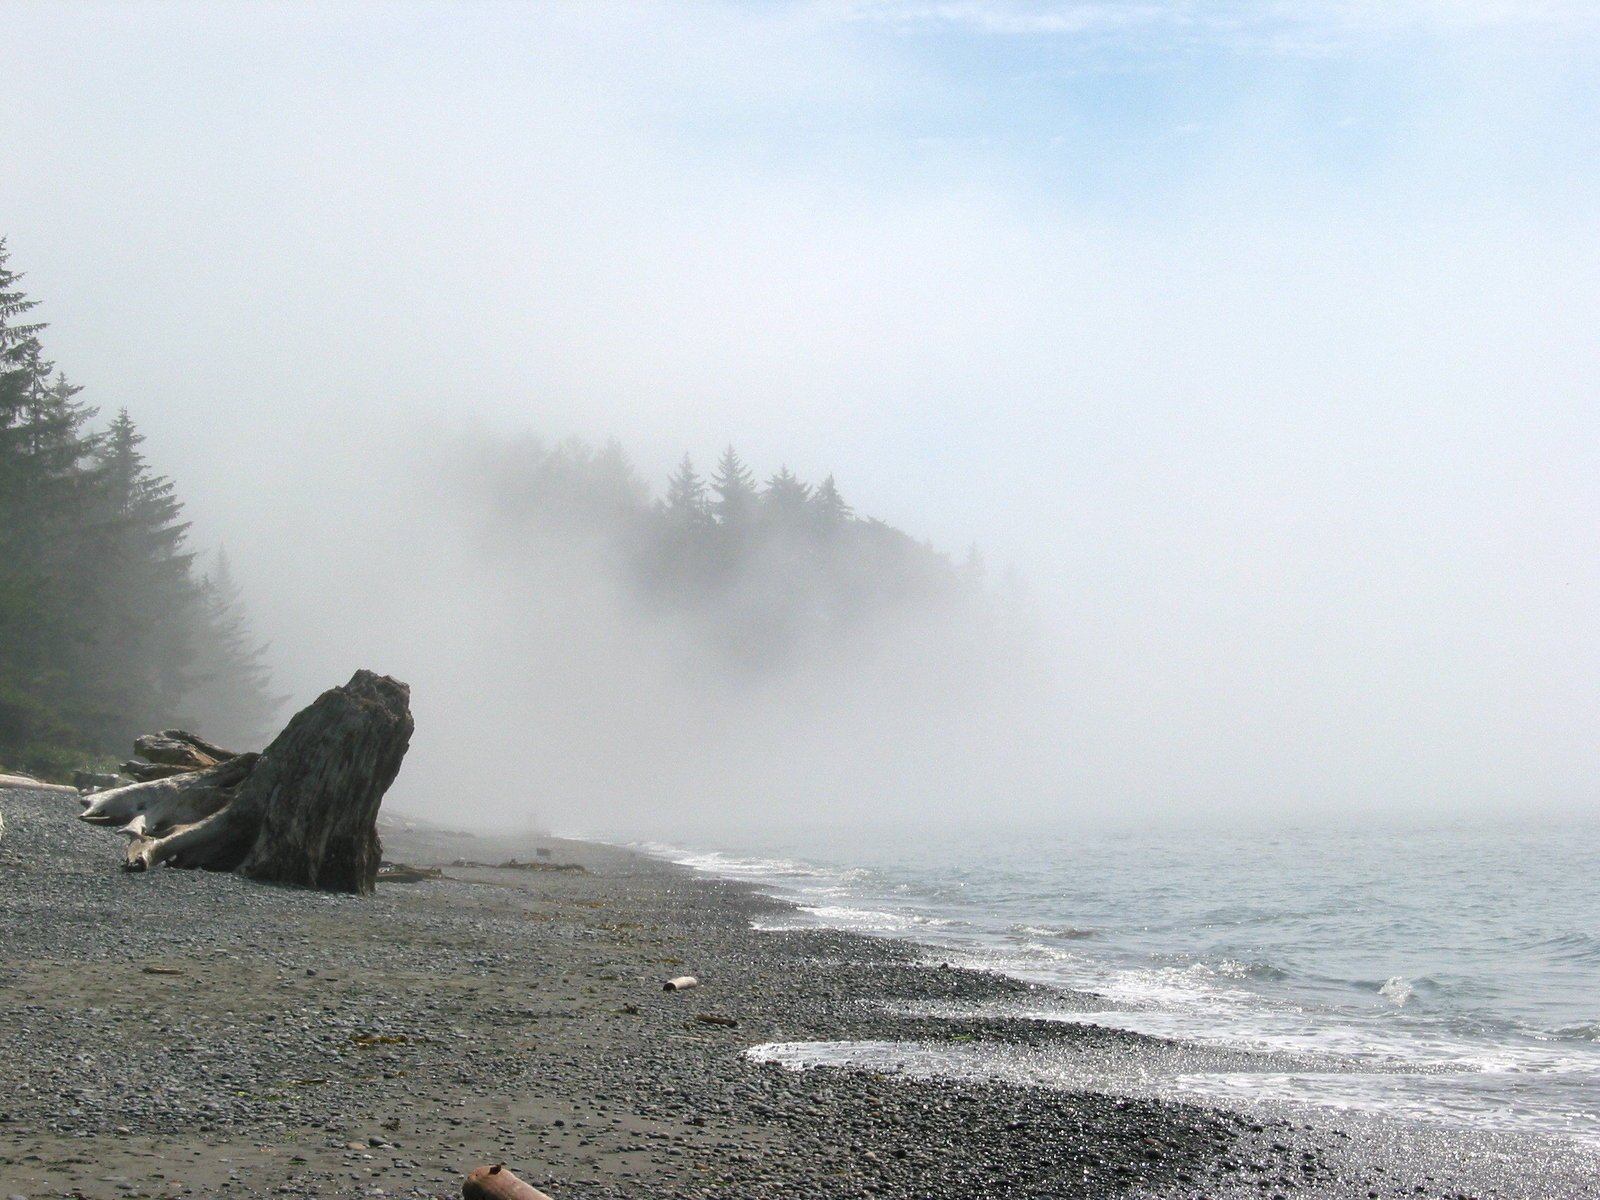 fog rising off the shore at low tide on an empty beach